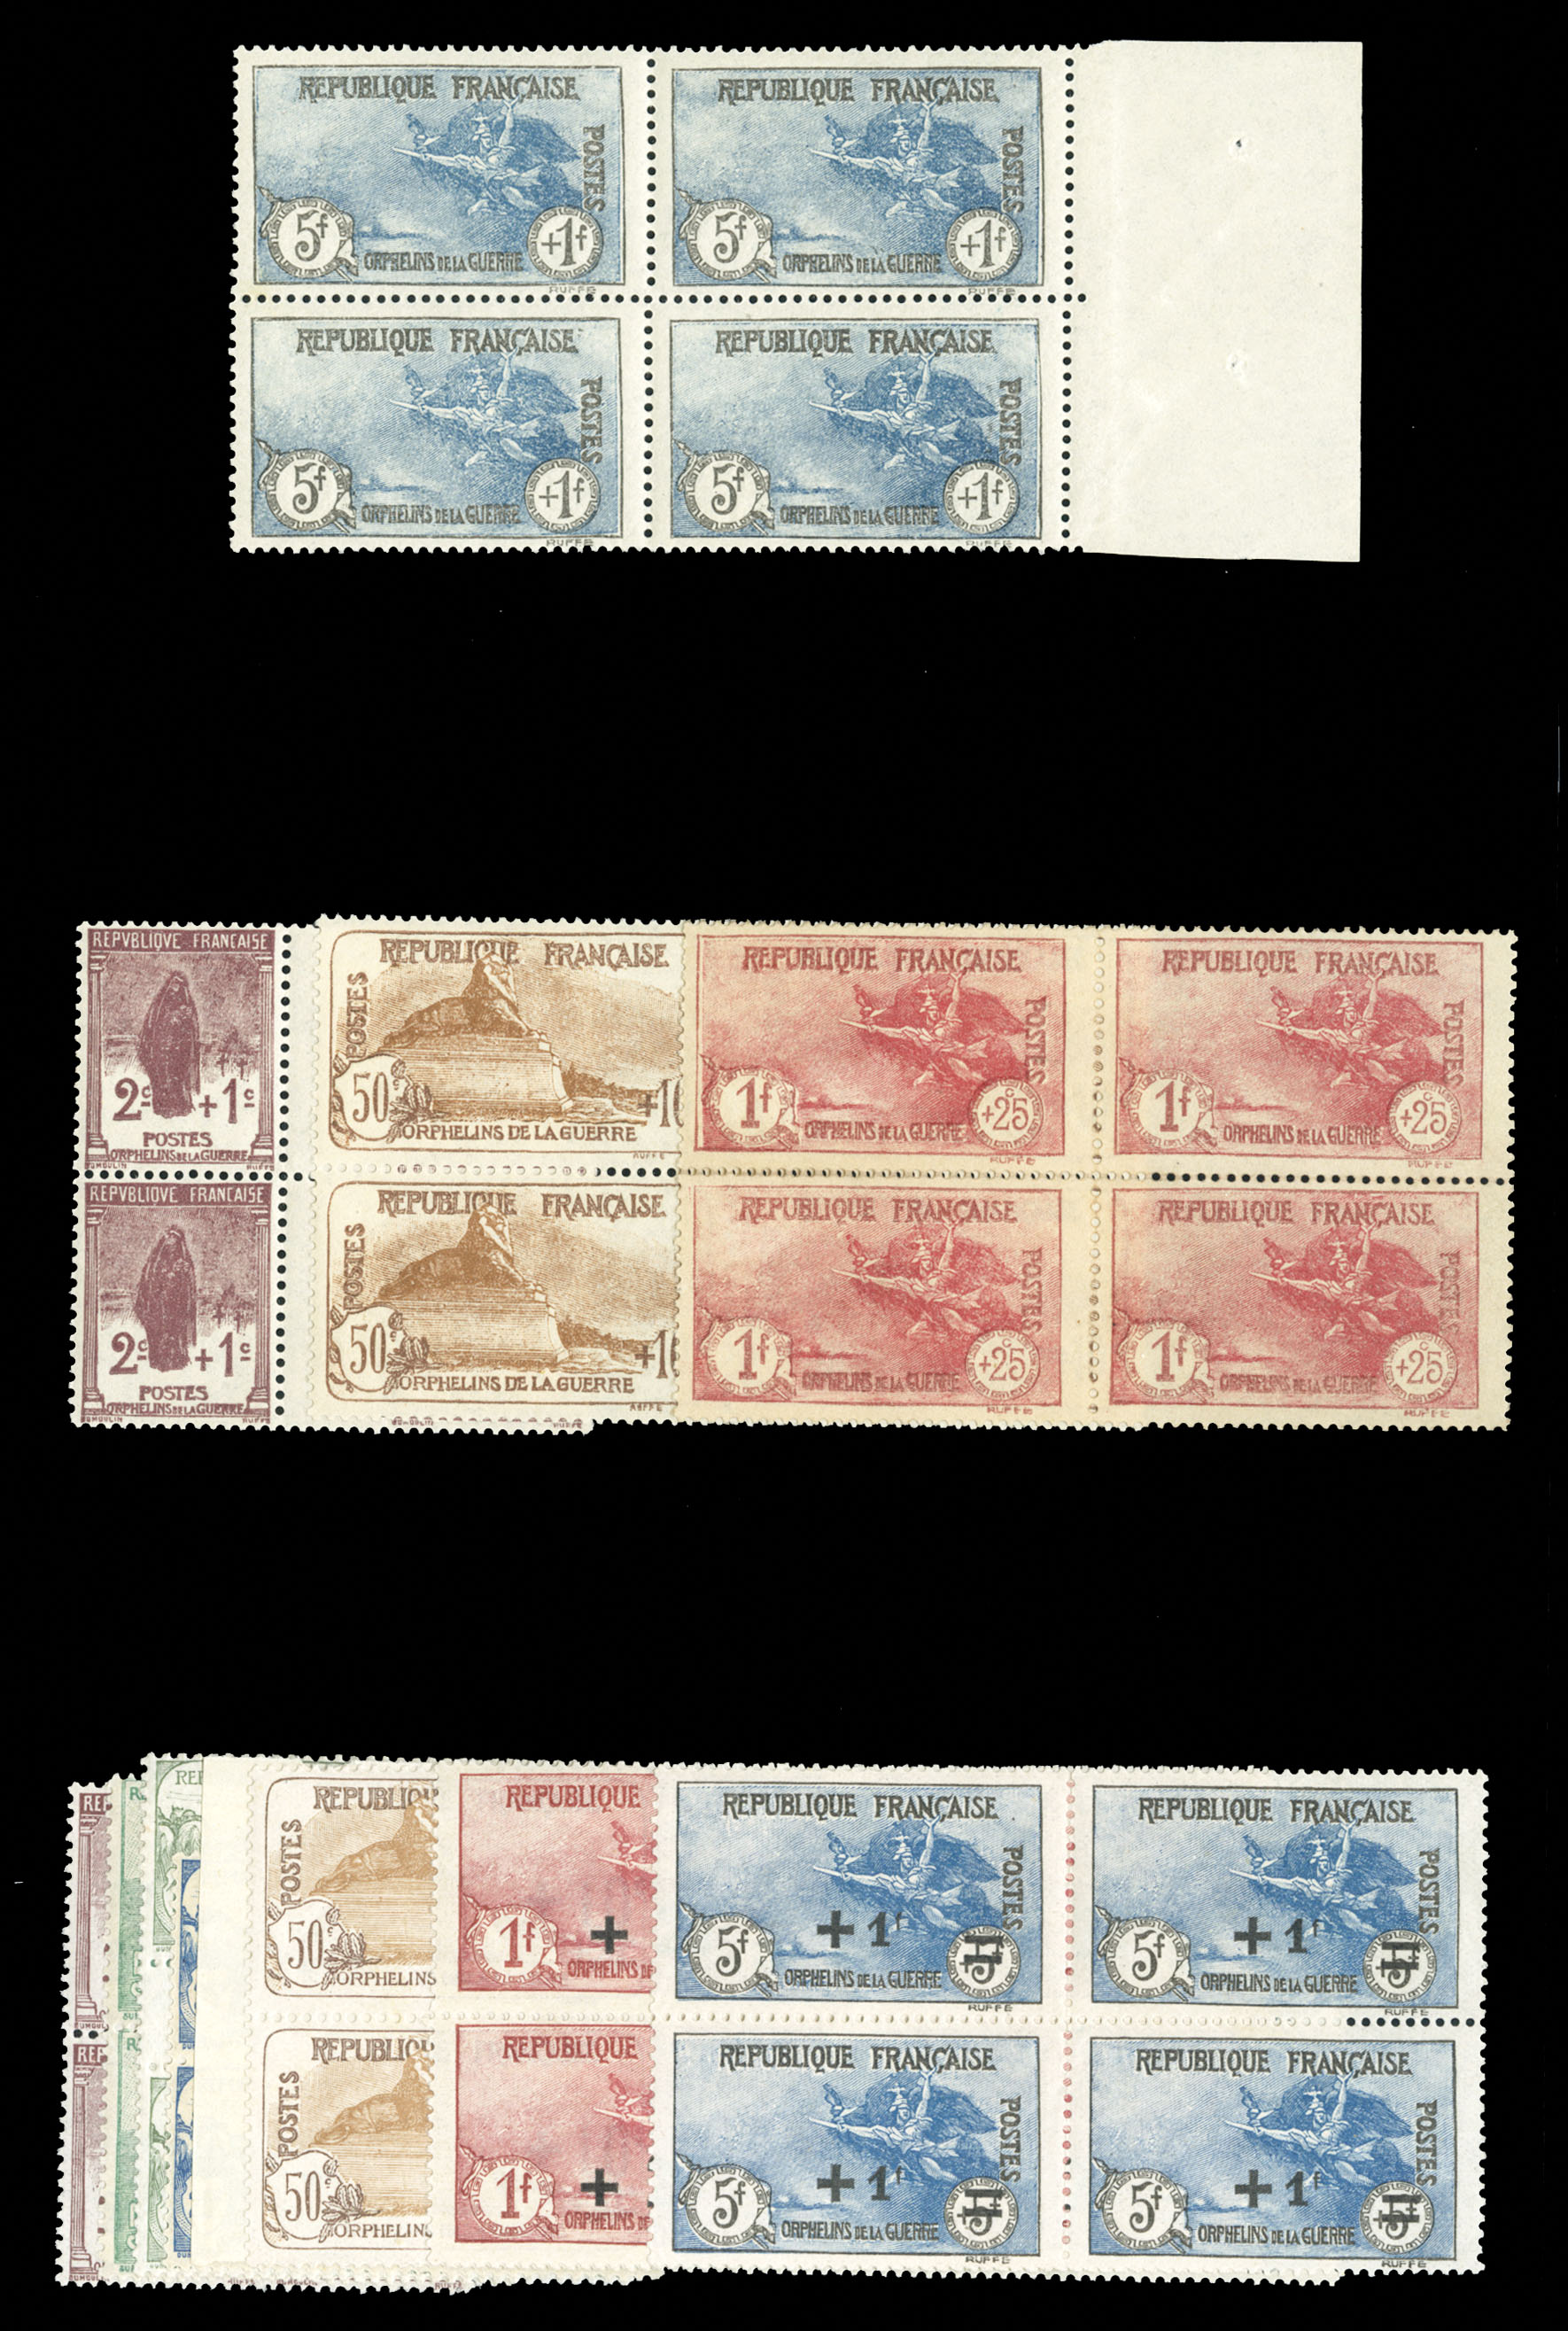 Lot 433 - France  -  Cherrystone Auctions U.S. & Worldwide Stamps & Postal History